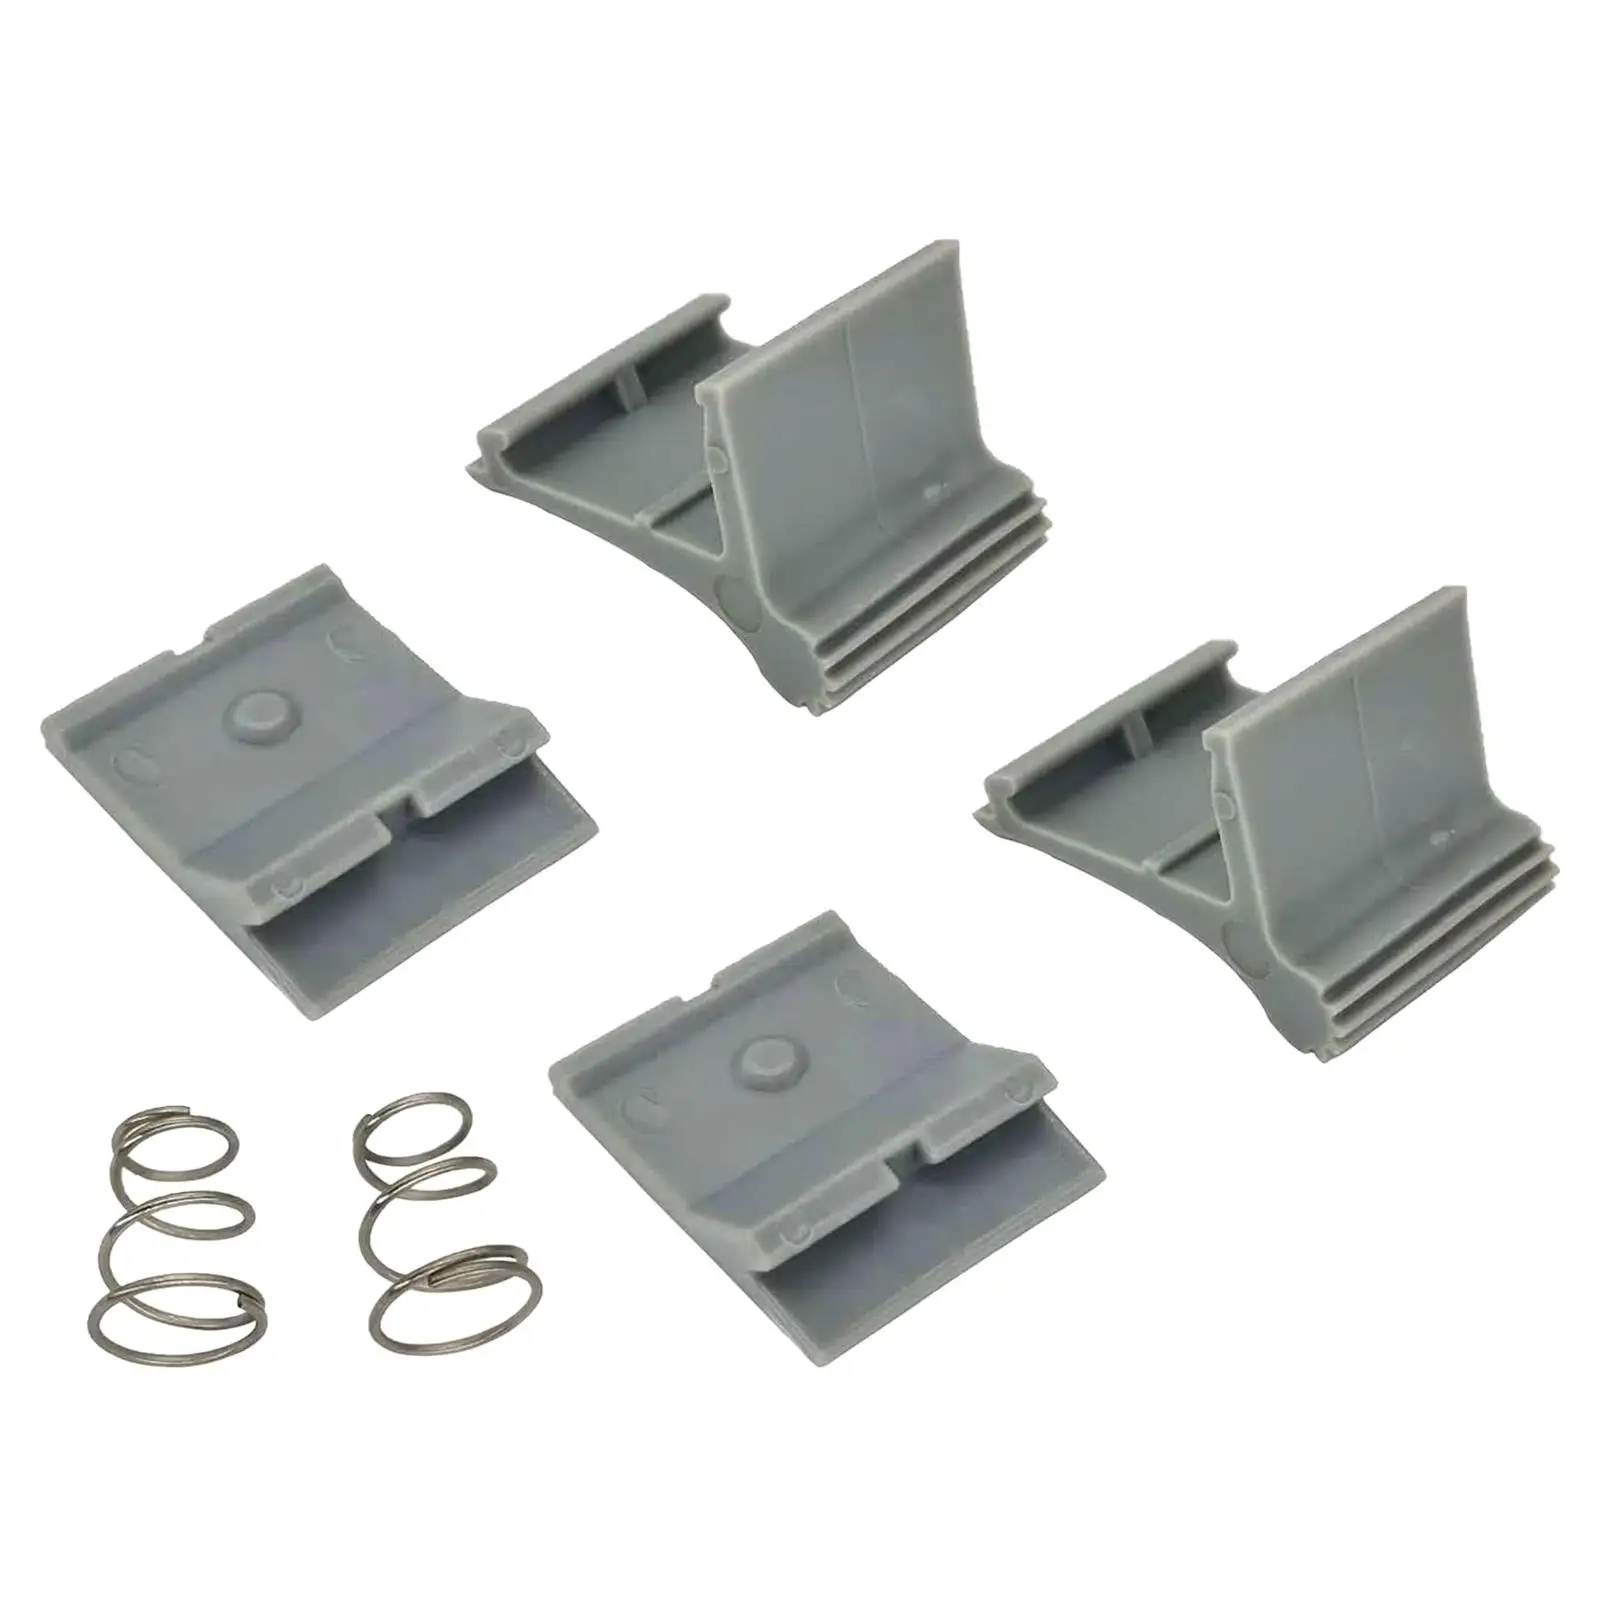 RV Awning Arm Slider Catch Set Assembly Spare Parts 4 Slider Catch with 2 Springs Replacement Accessories for Motorhome RV